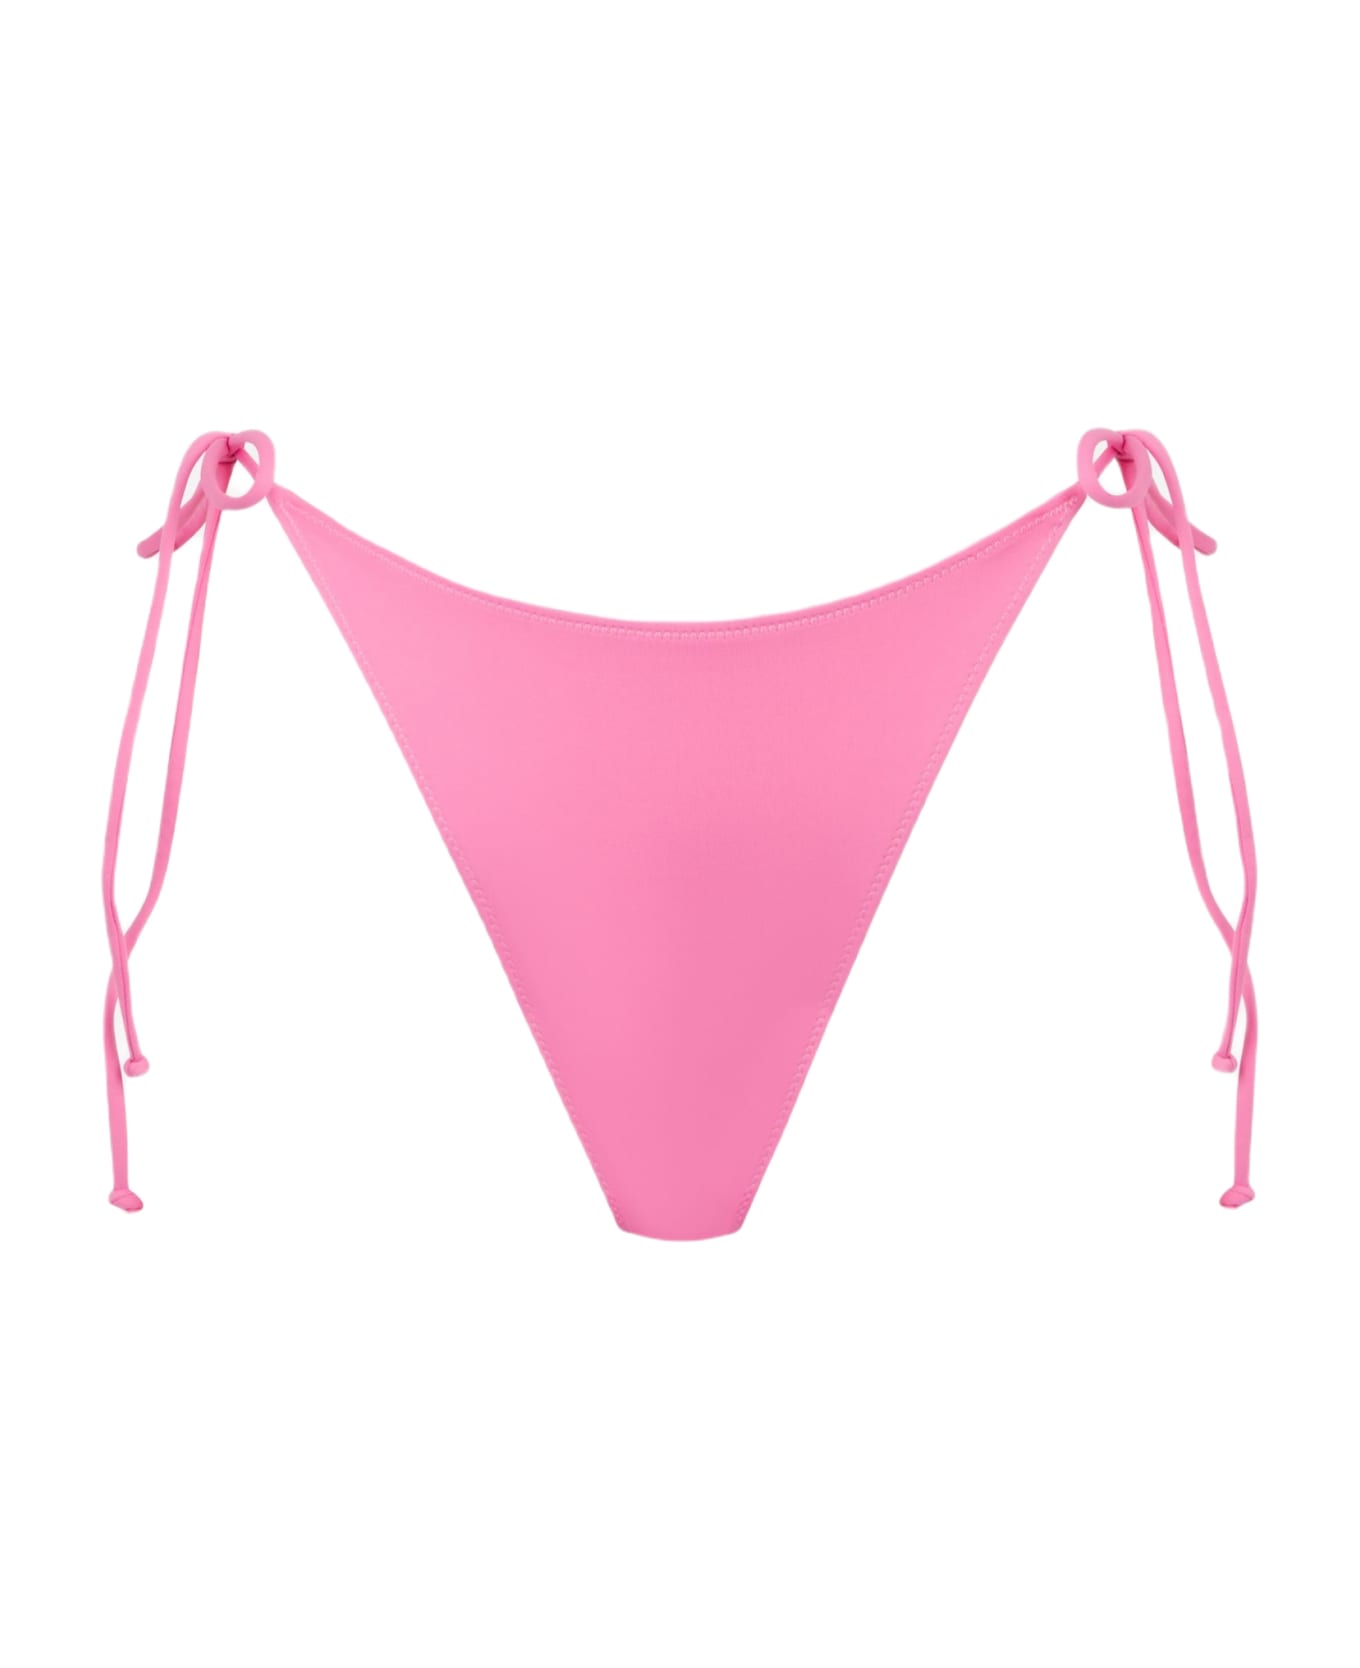 MC2 Saint Barth Woman Pink Swim Briefs With Side Laces - PINK